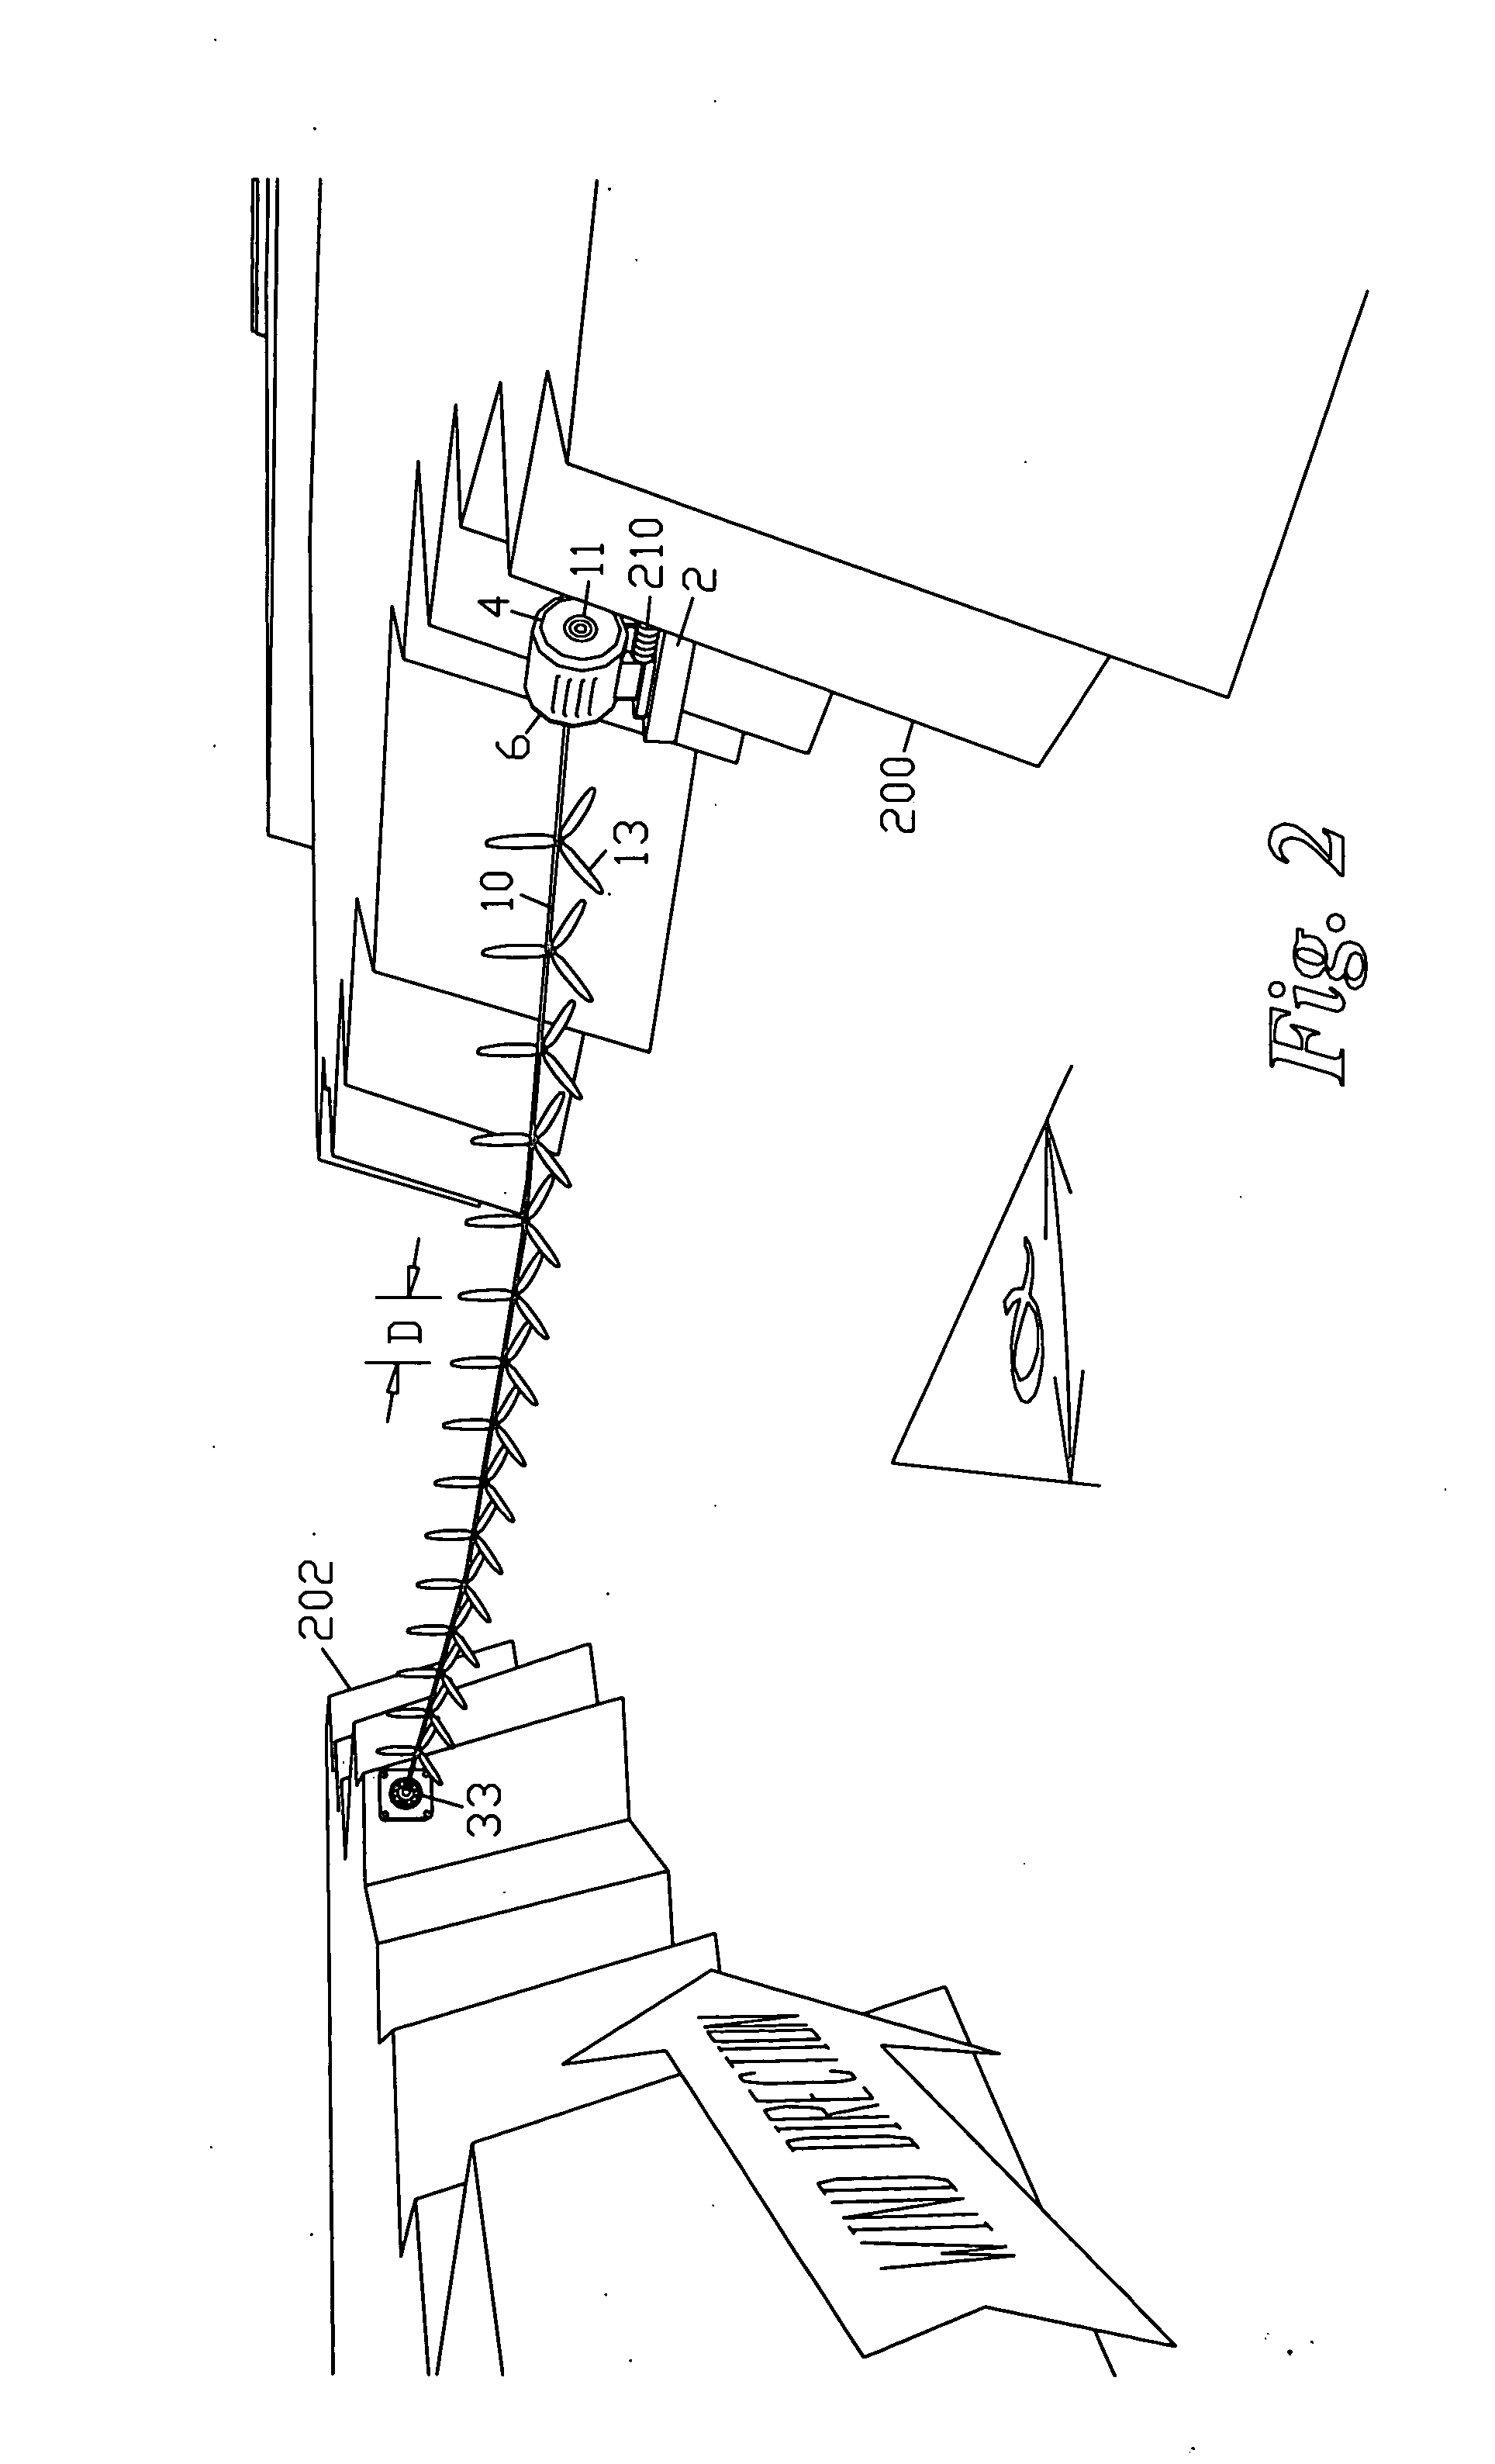 Stationary co-axial multi-rotor wind turbine supported by continuous central driveshaft